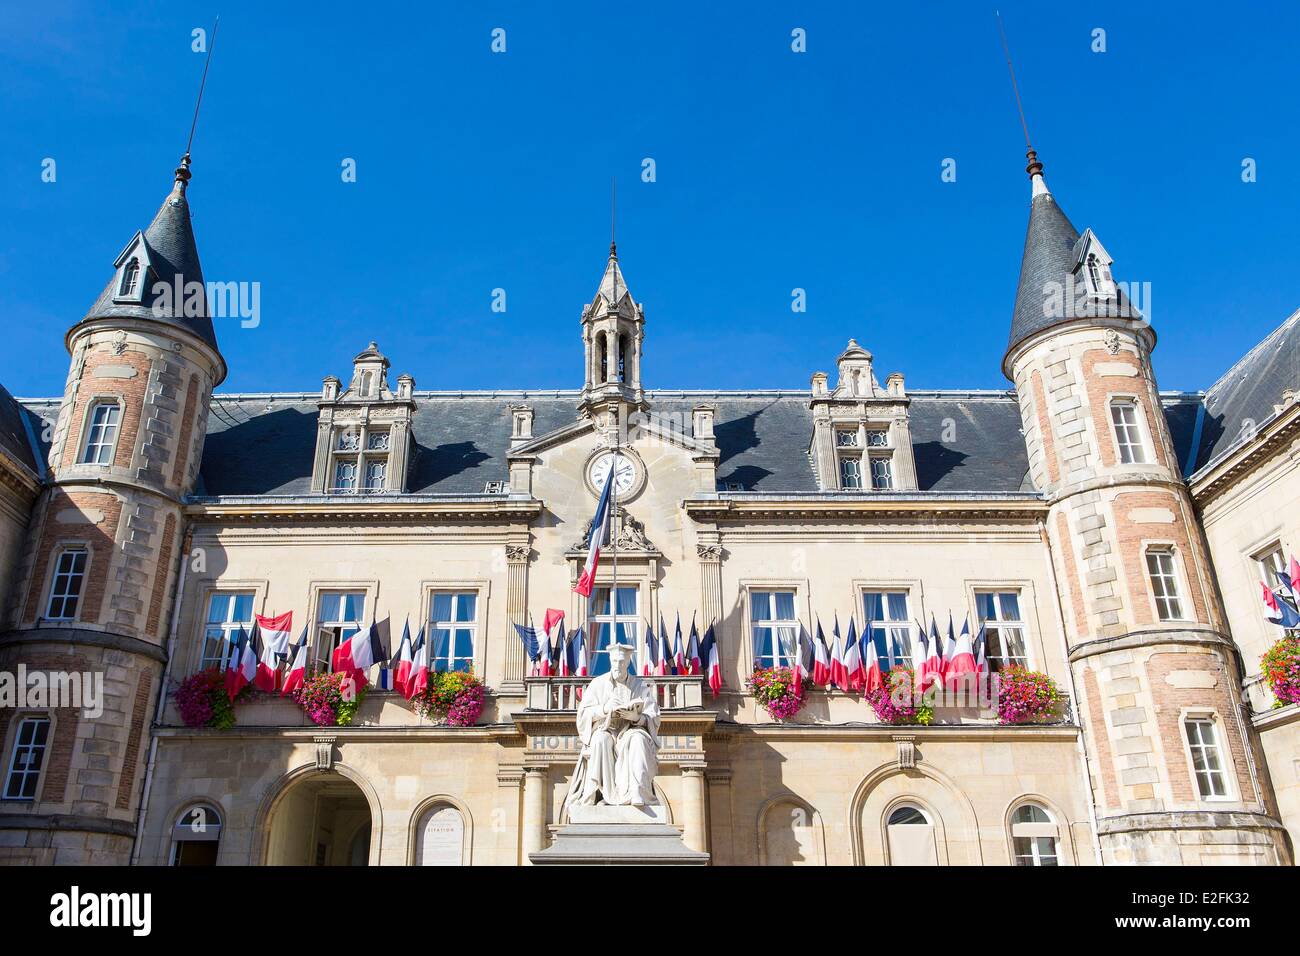 France, Seine et Marne, Melun, Jacques Amyot statue in front of the townhall Stock Photo